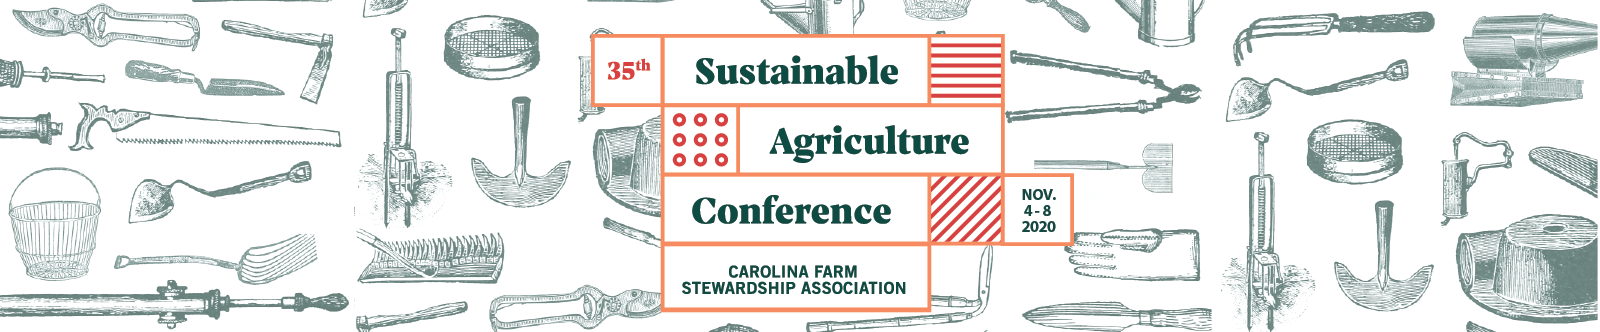 2020 Sustainable Agriculture Conference banner